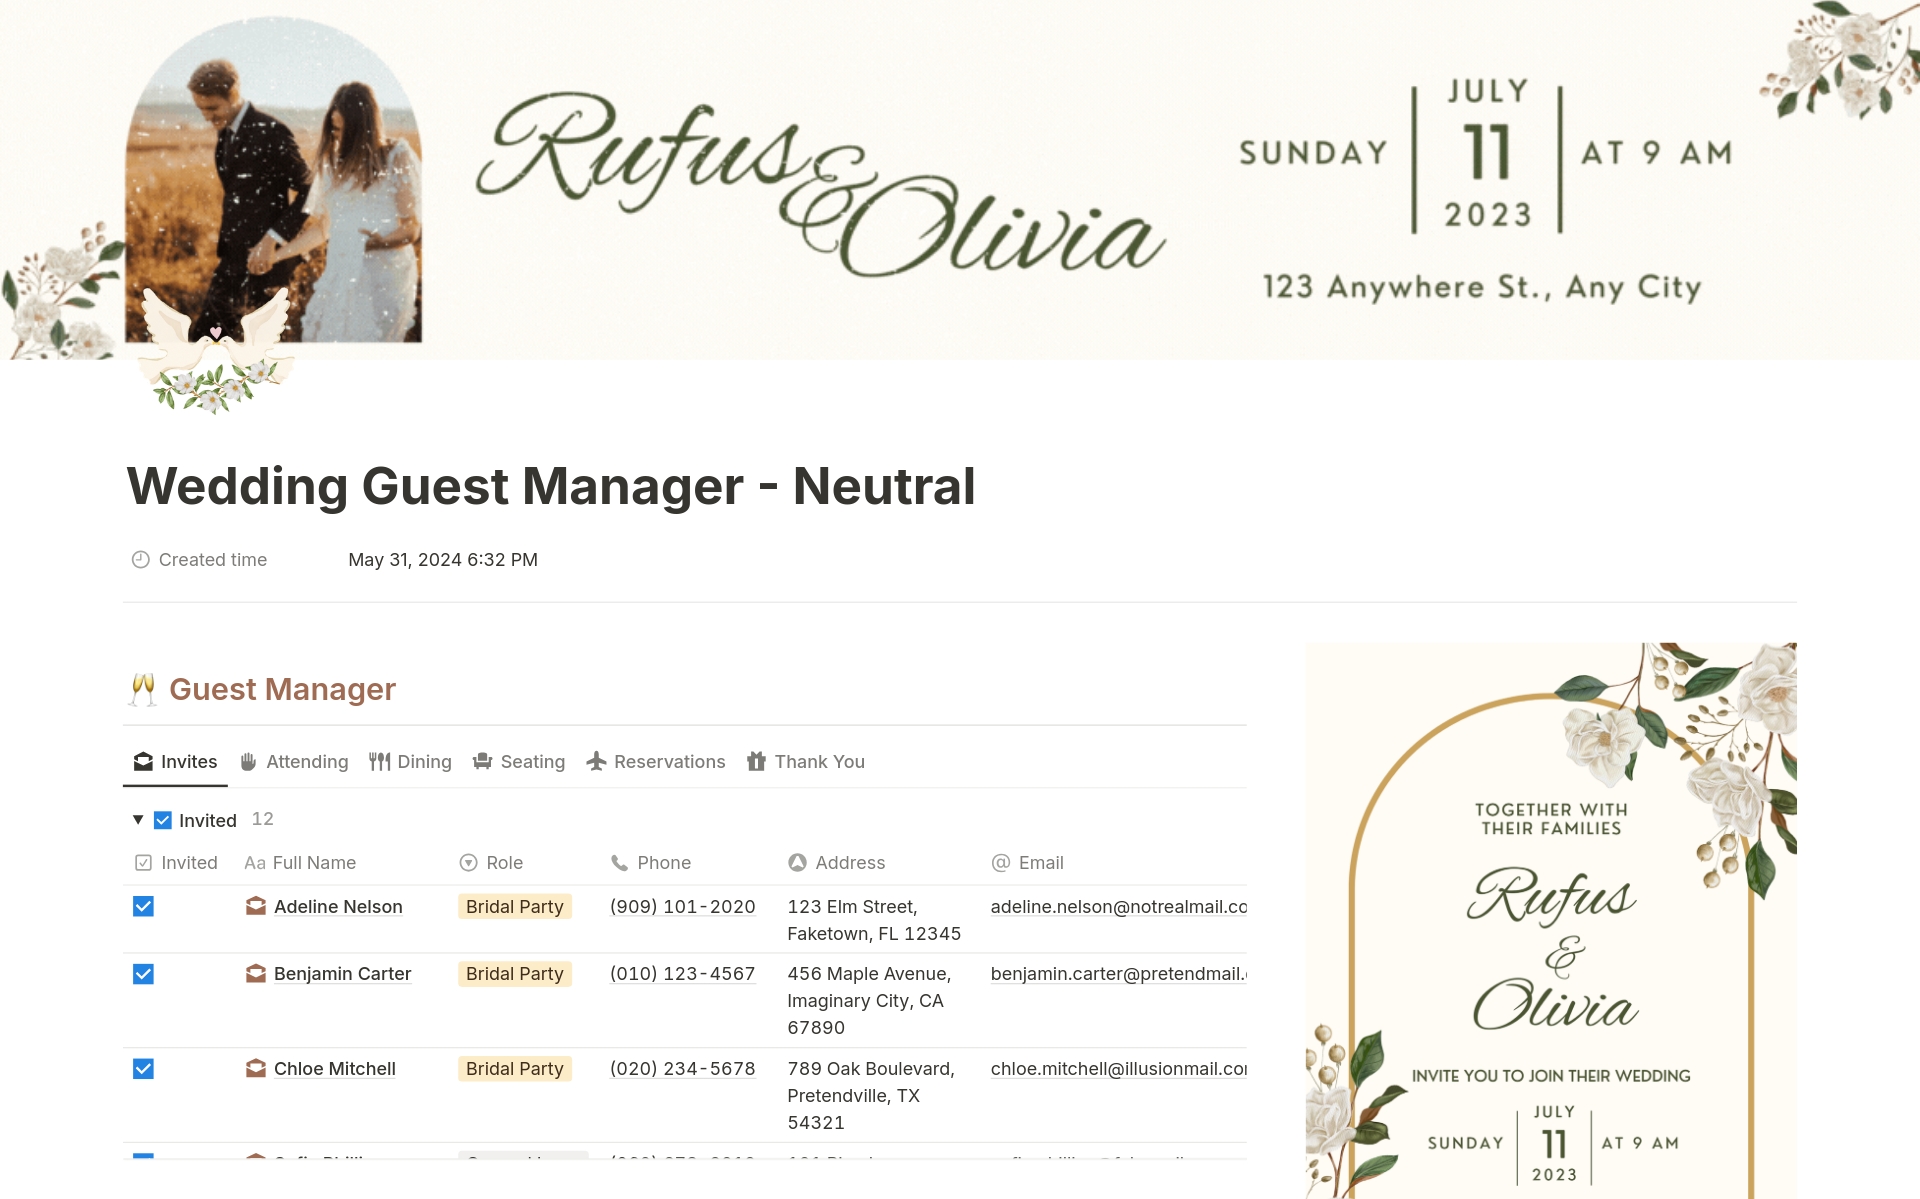 Our guest list planner is your perfect partner for wedding preparations, offering a stylish and easy-to-use guest information manager and wedding guest RSVP coordinator. It includes an attendance tracker, contact manager, and comprehensive RSVP log.